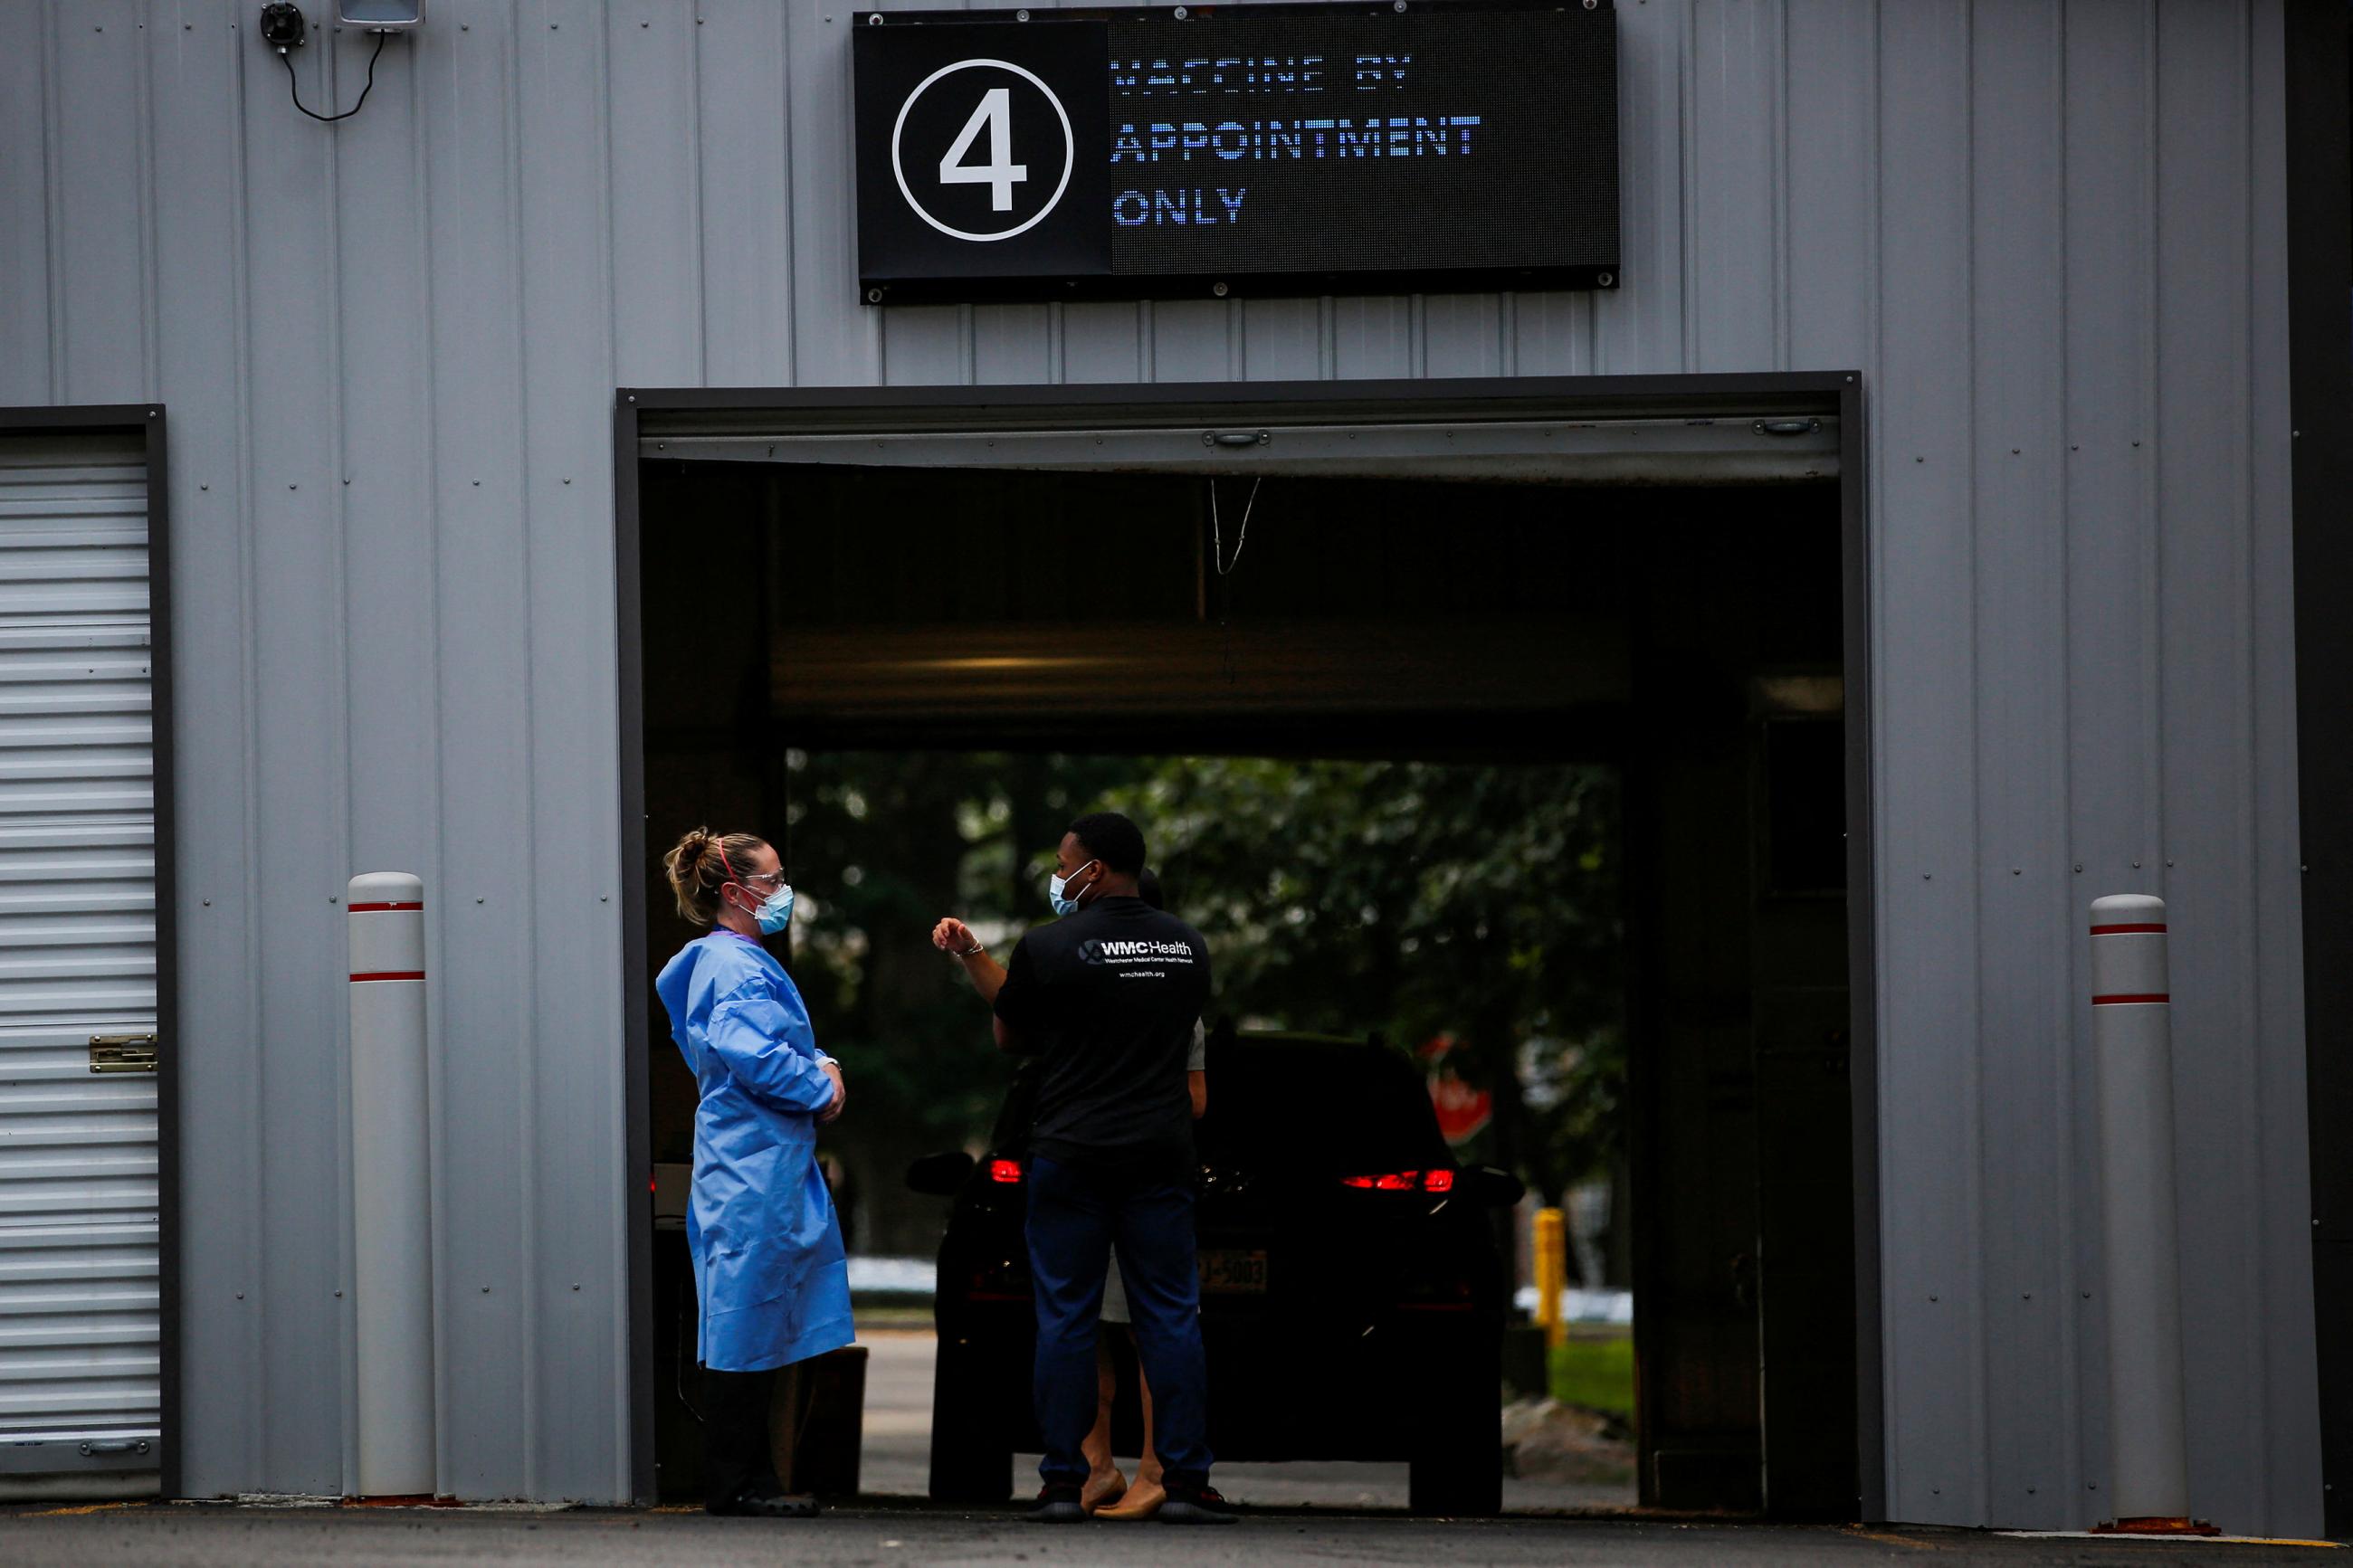 Male and female staff members of the Westchester Medical Center are pictured wearing PPE in front of a car port